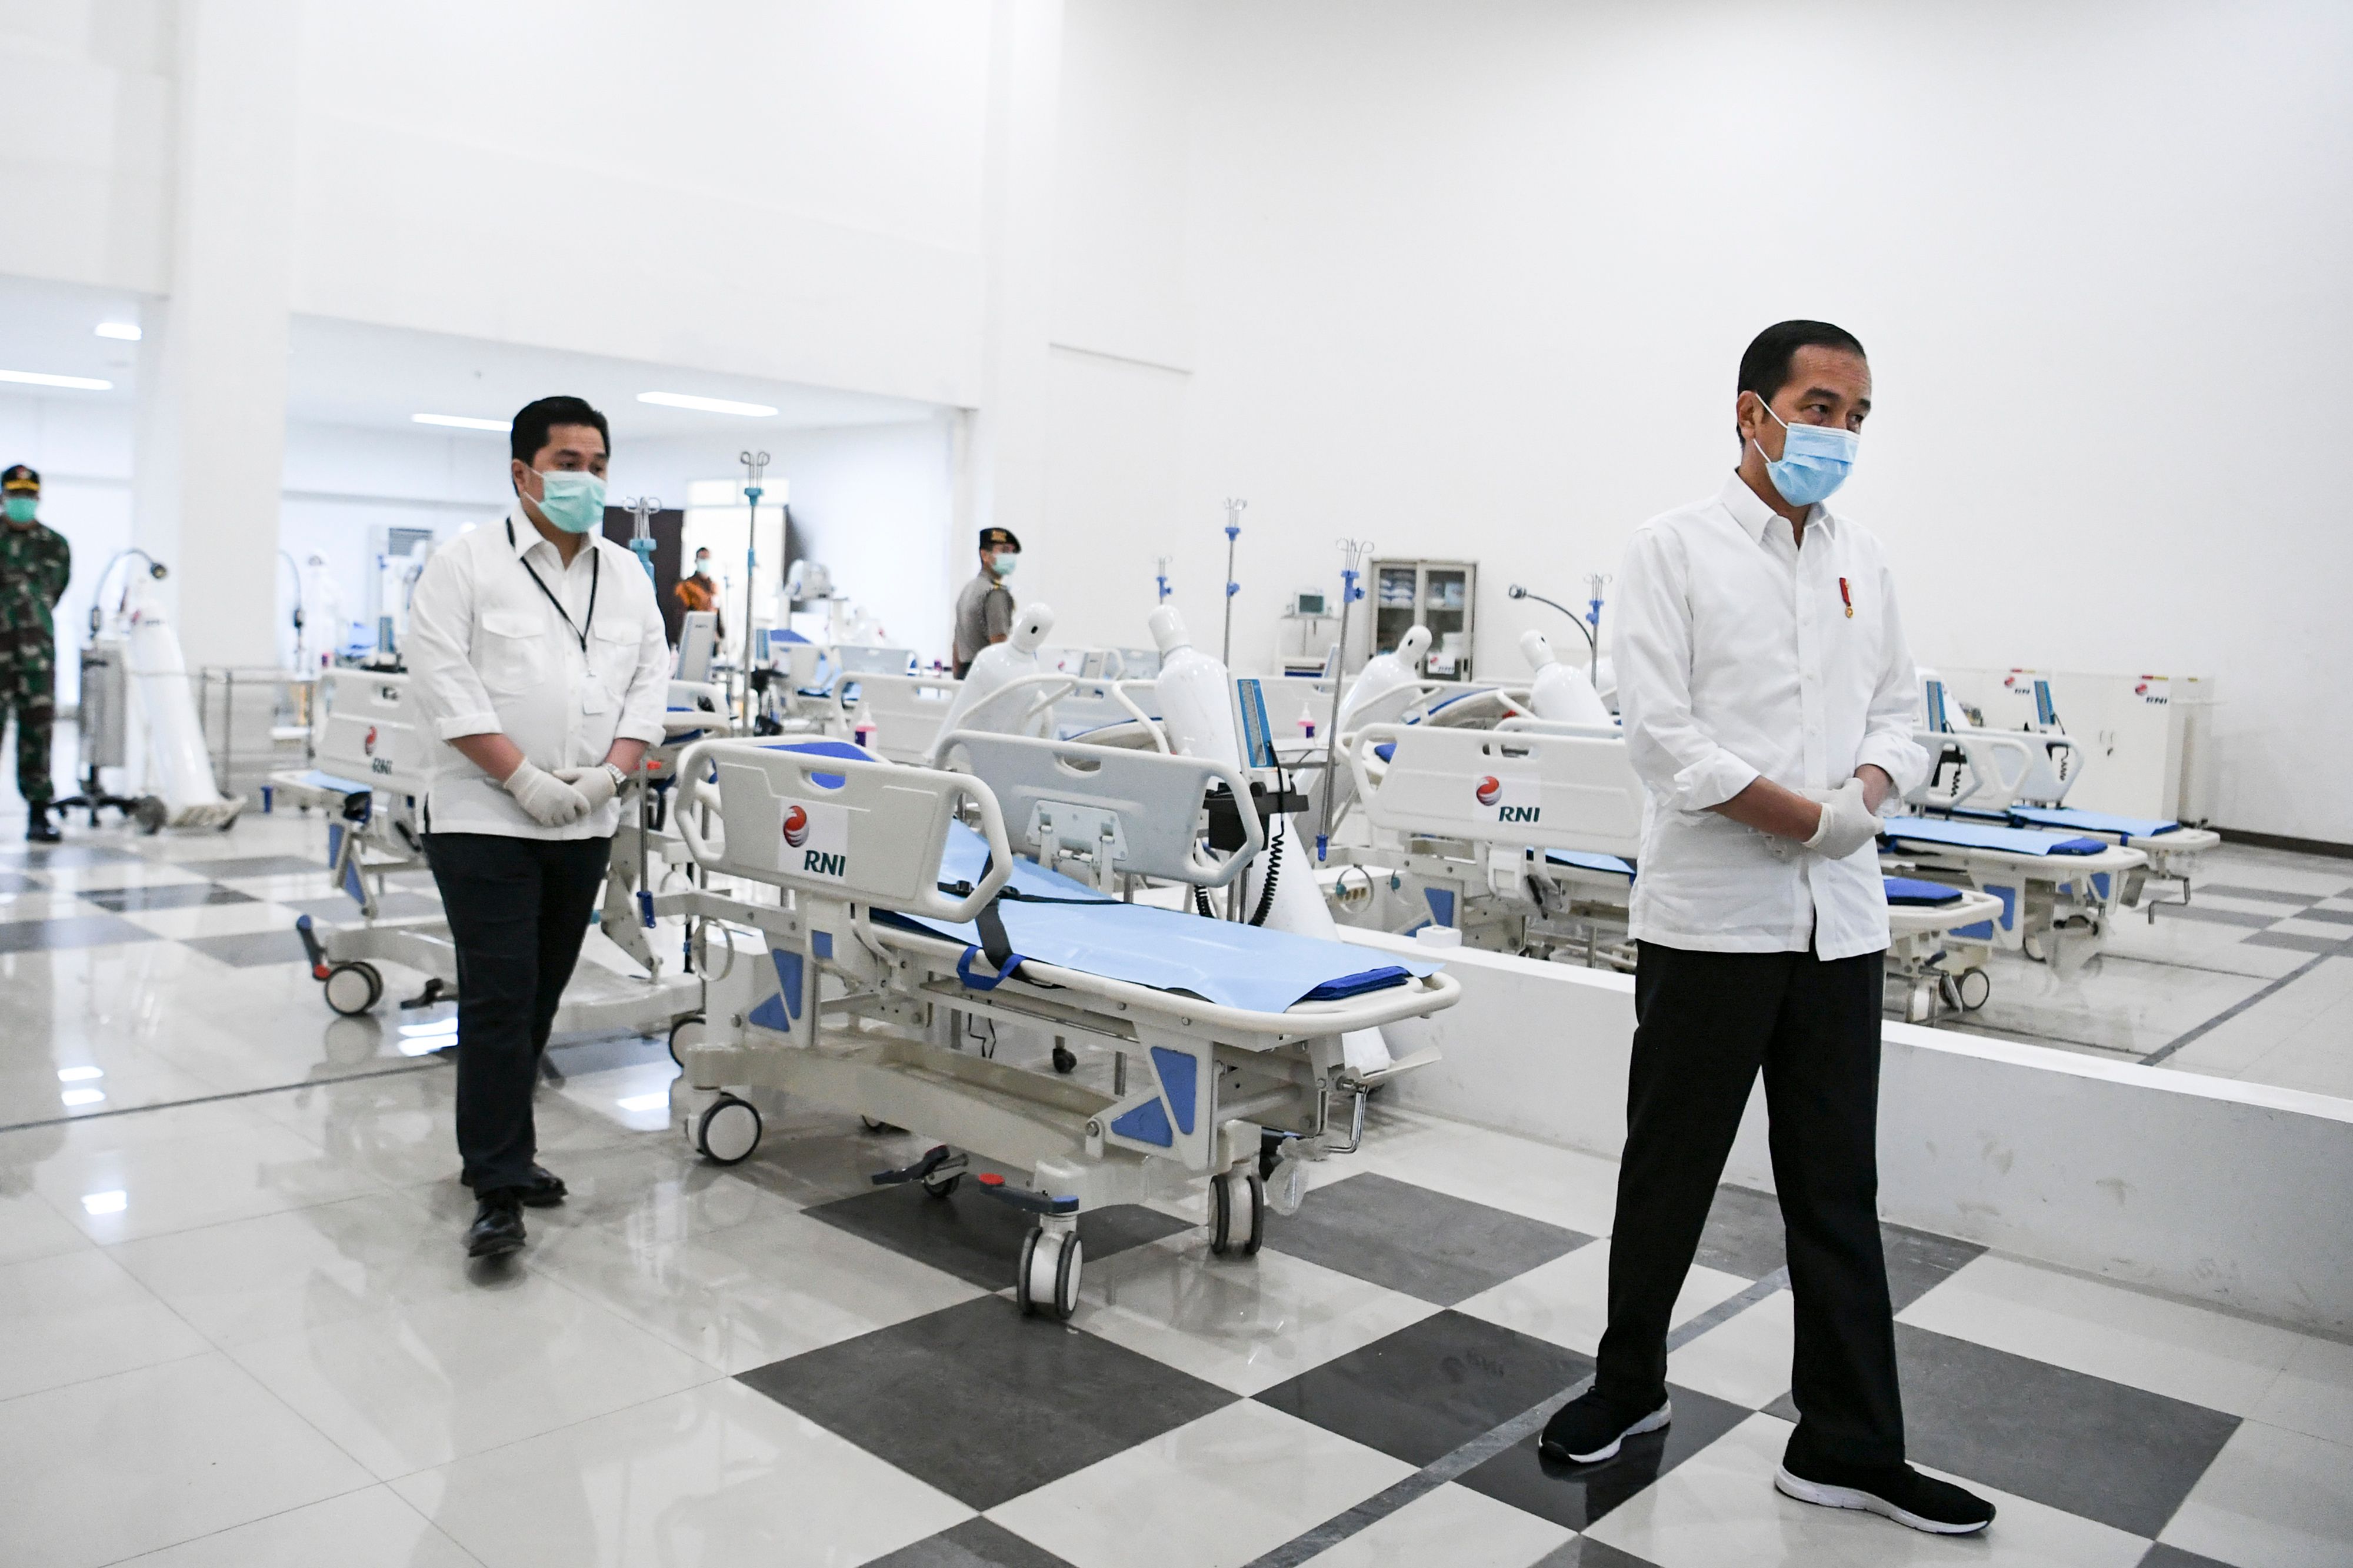 Joko Widodo, right, inspects a room at a hospital for coronavirus patients in Jakarta on March 23.